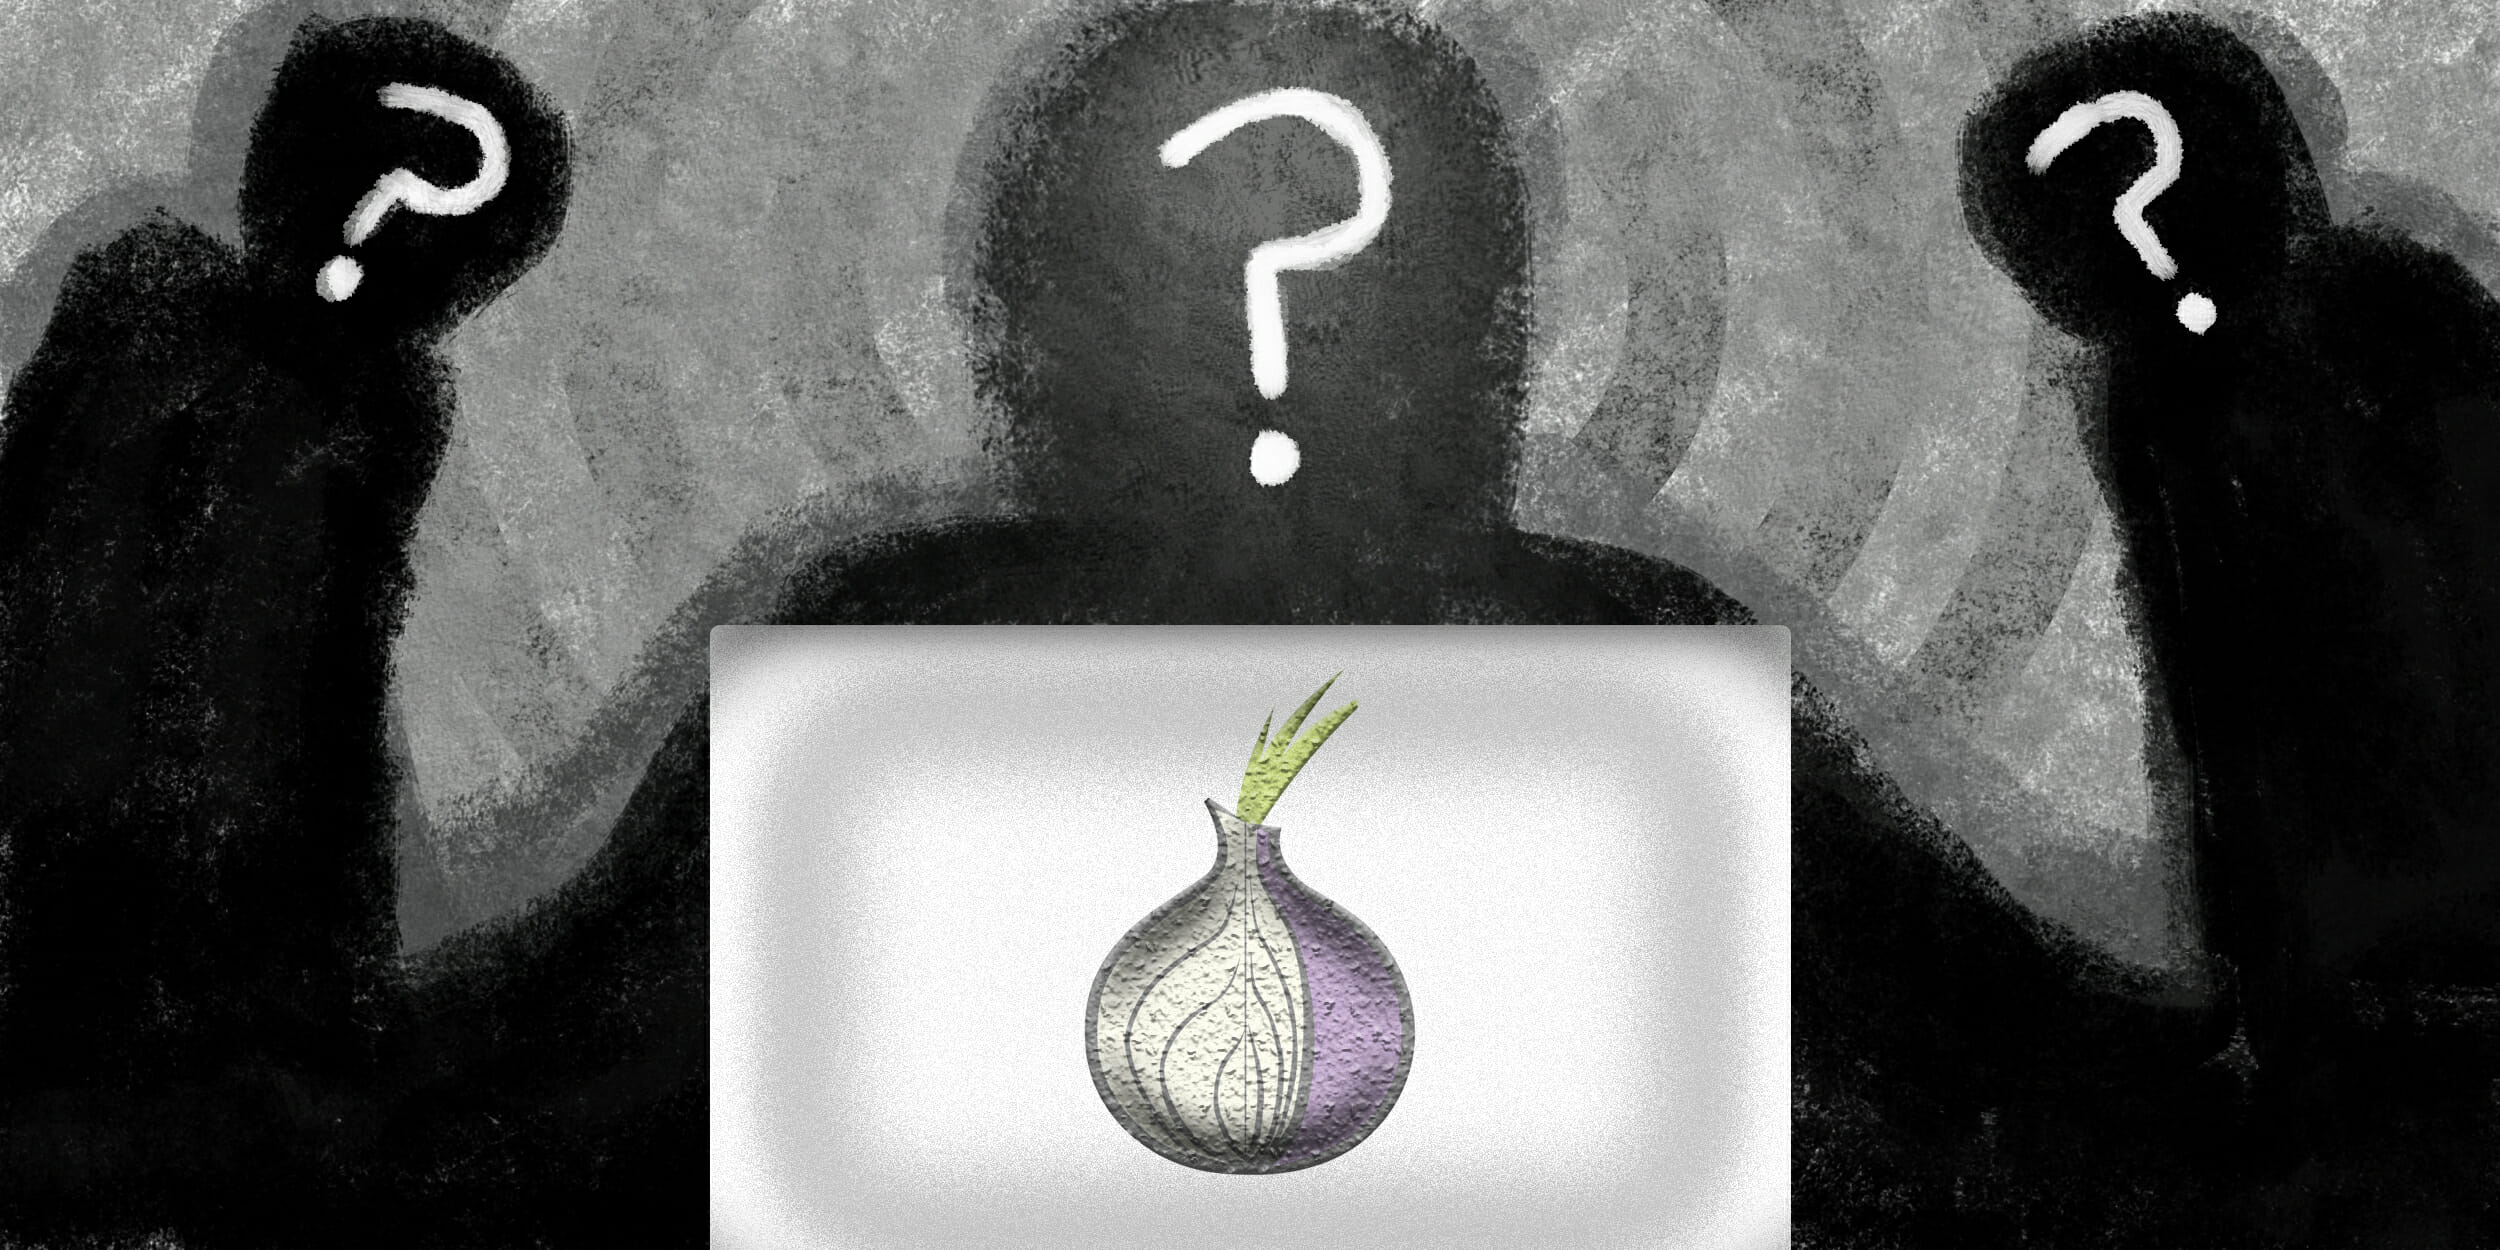 tor meaning deep web